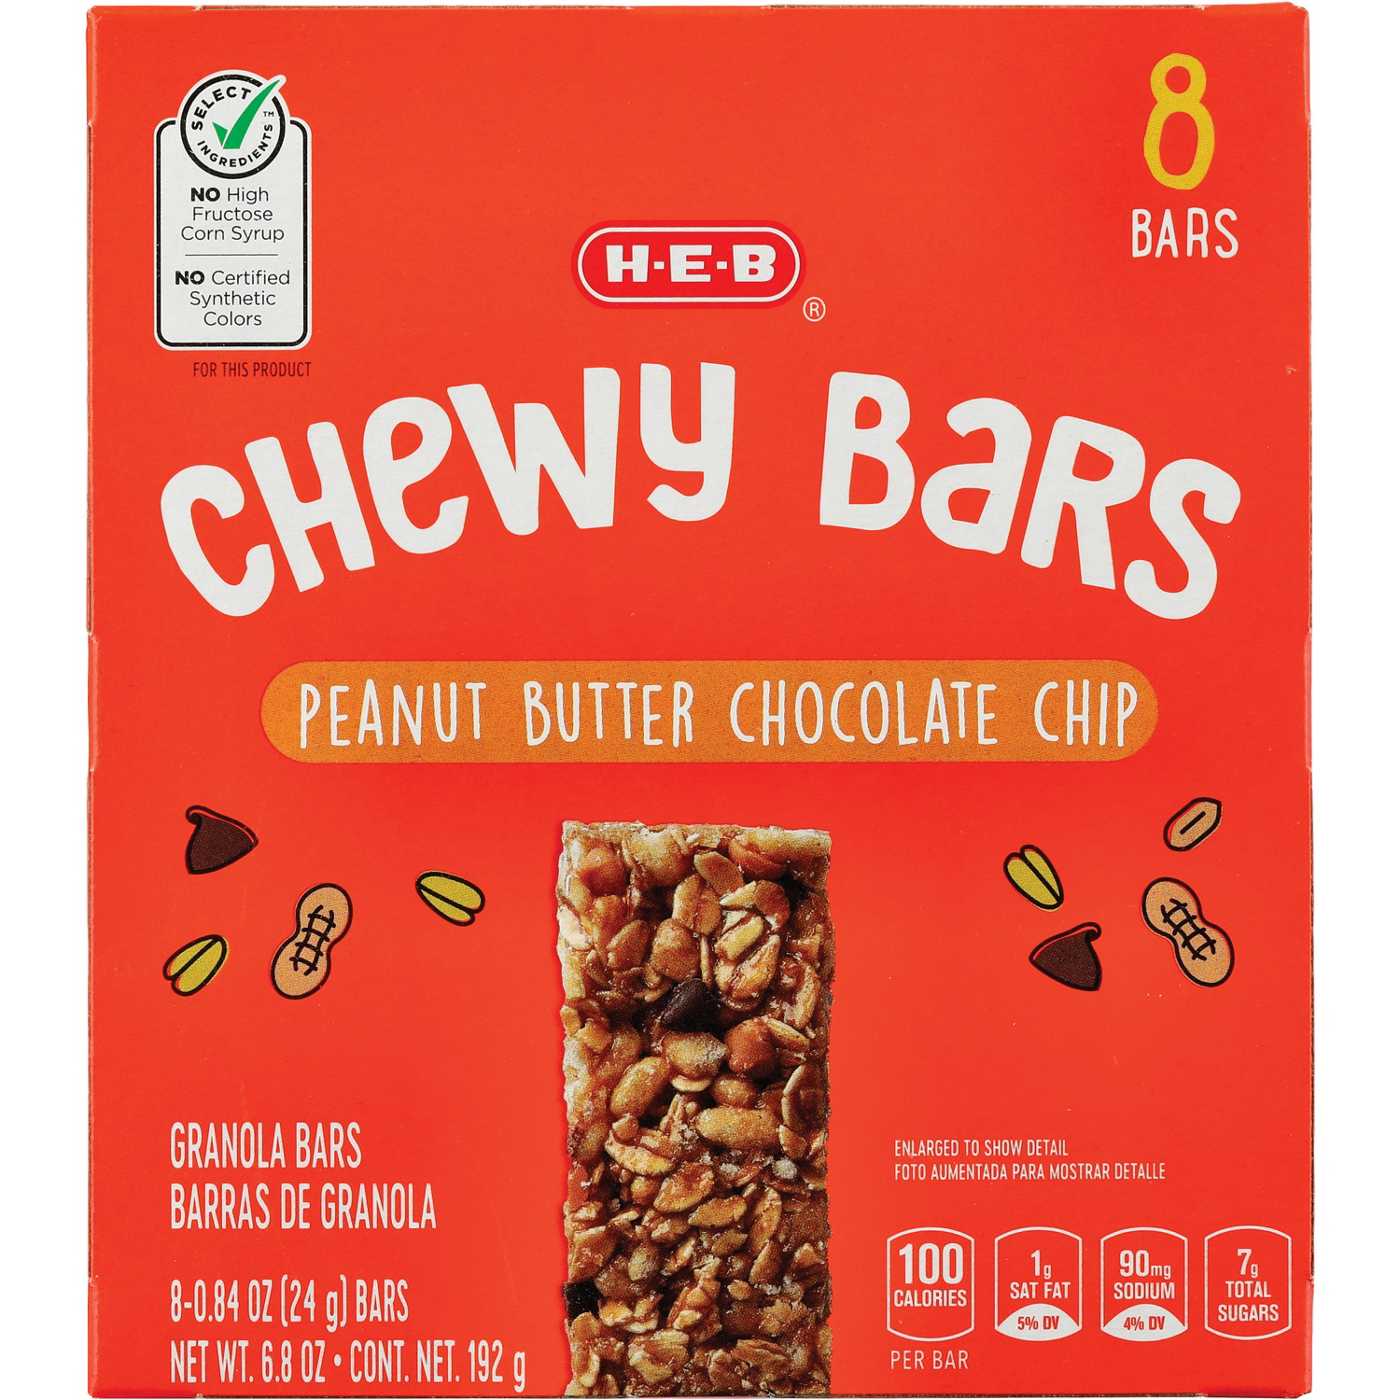 H-E-B Peanut Butter Chocolate Chip Chewy Bars; image 1 of 2